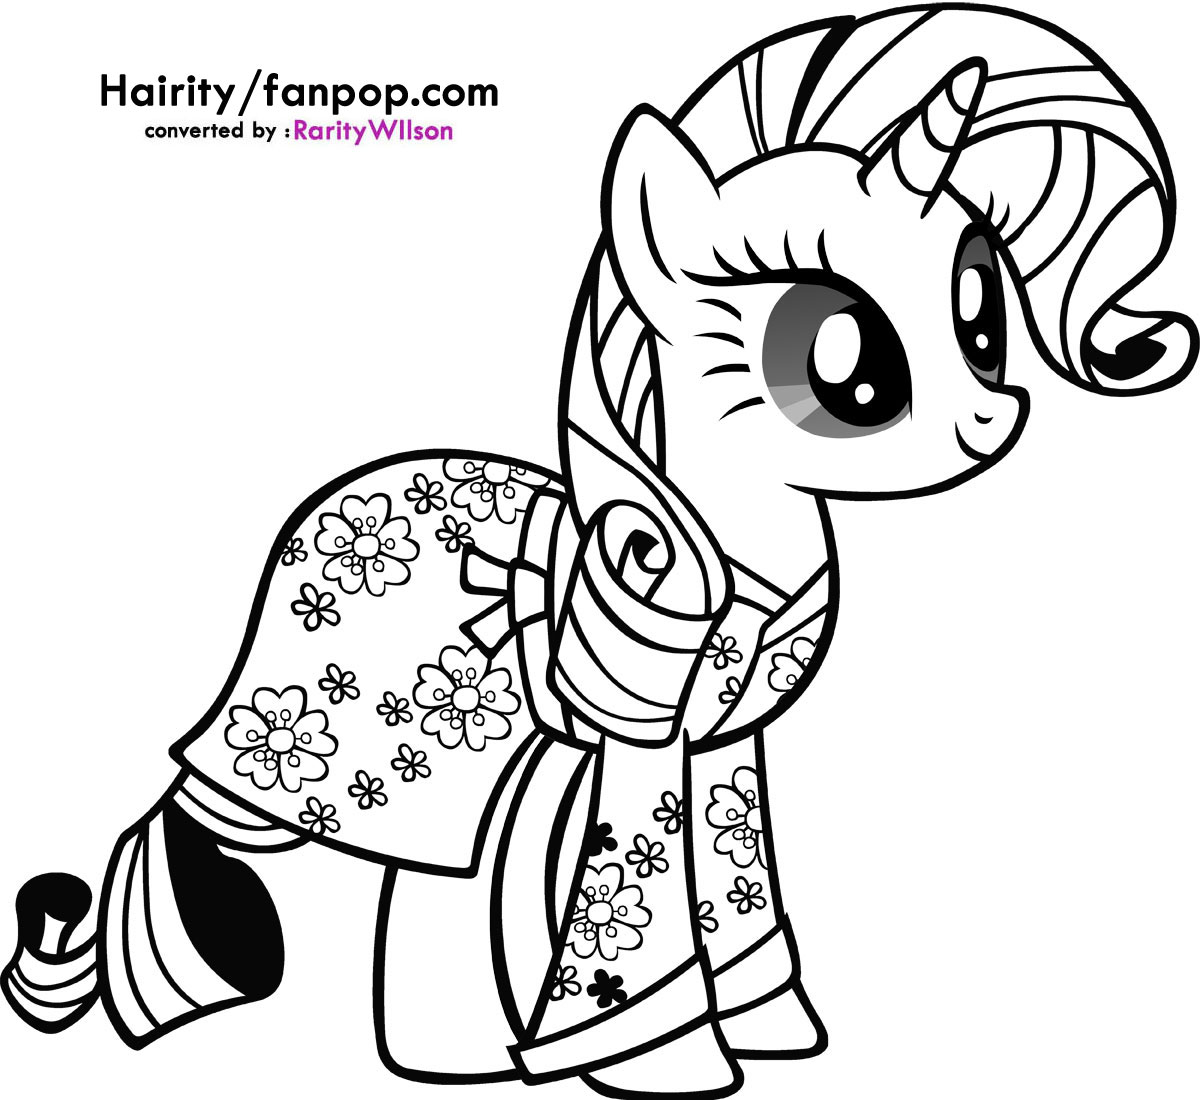 my little pony coloring pages páginas para colorear originales original coloring pages little my pony pages coloring 